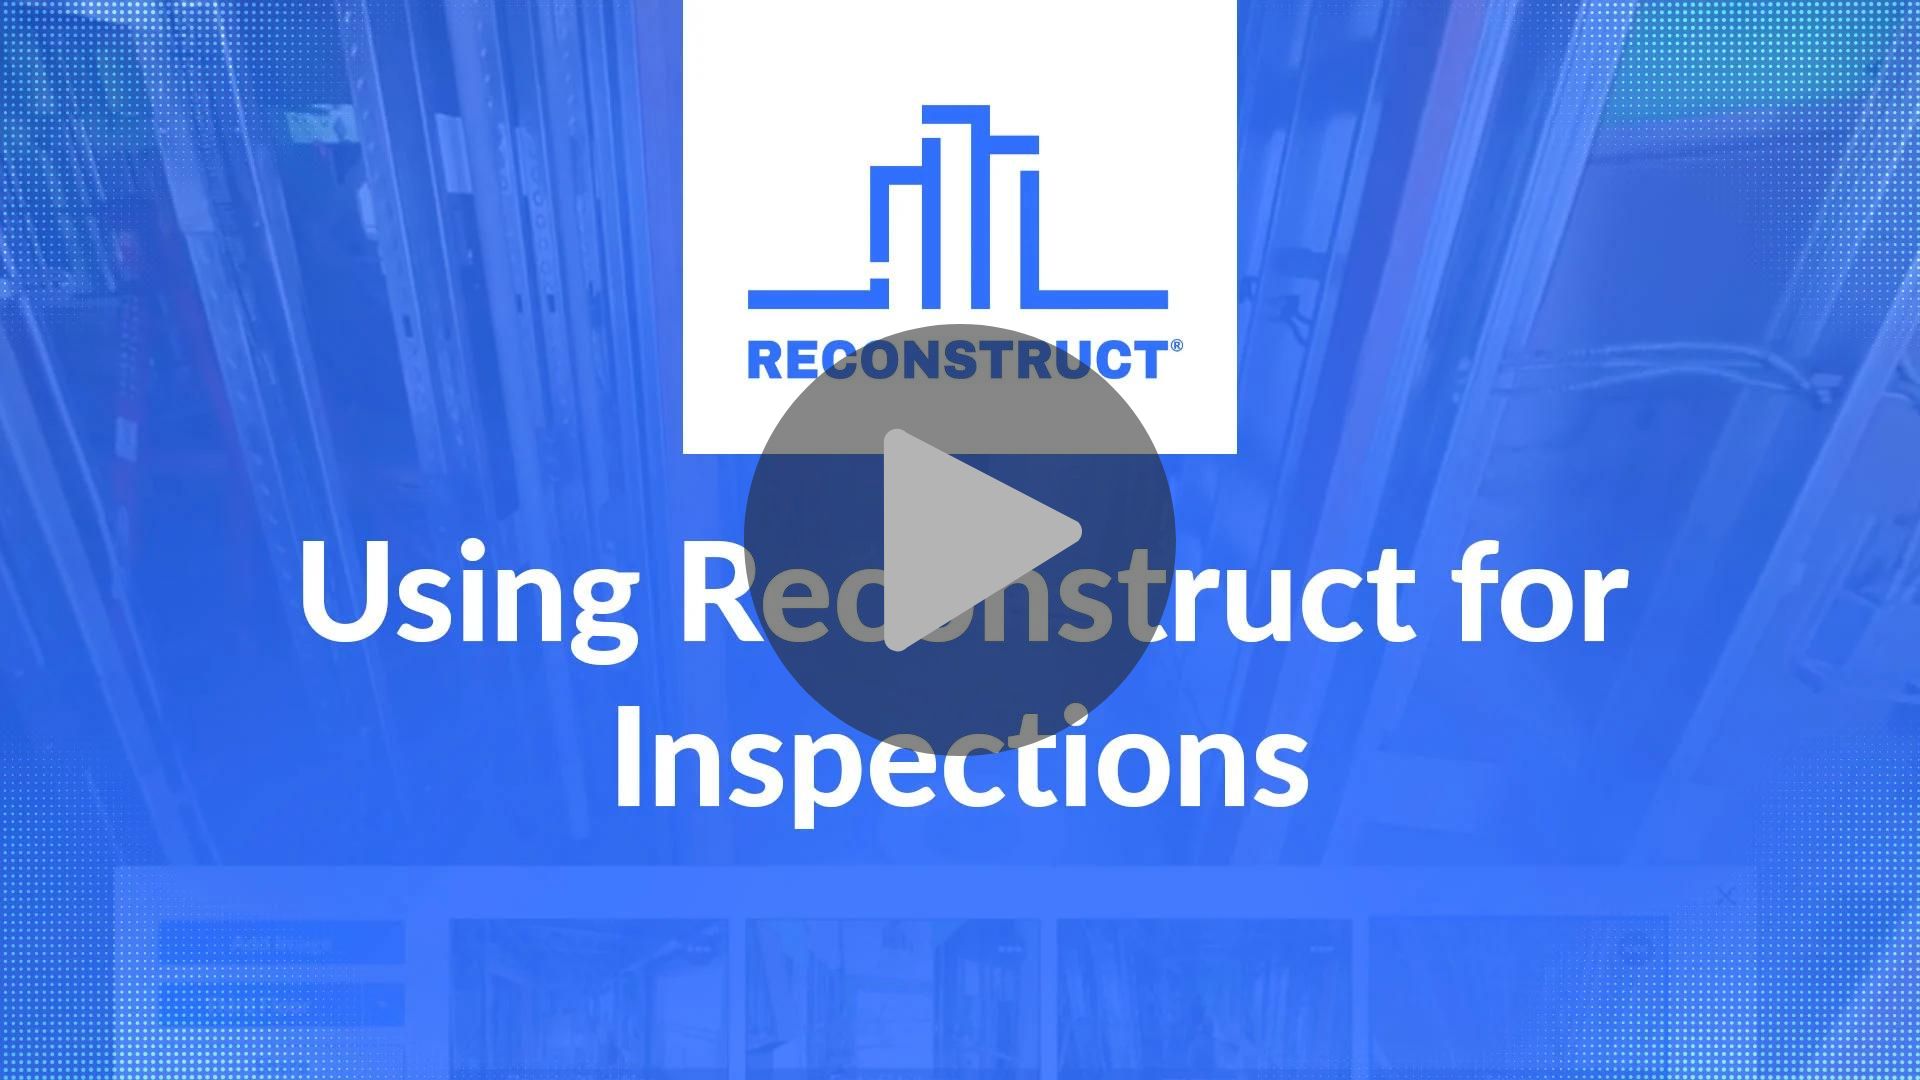 RI-Video-Using-Reconstruct-for-Inspections-Thumbnail-Playbutton